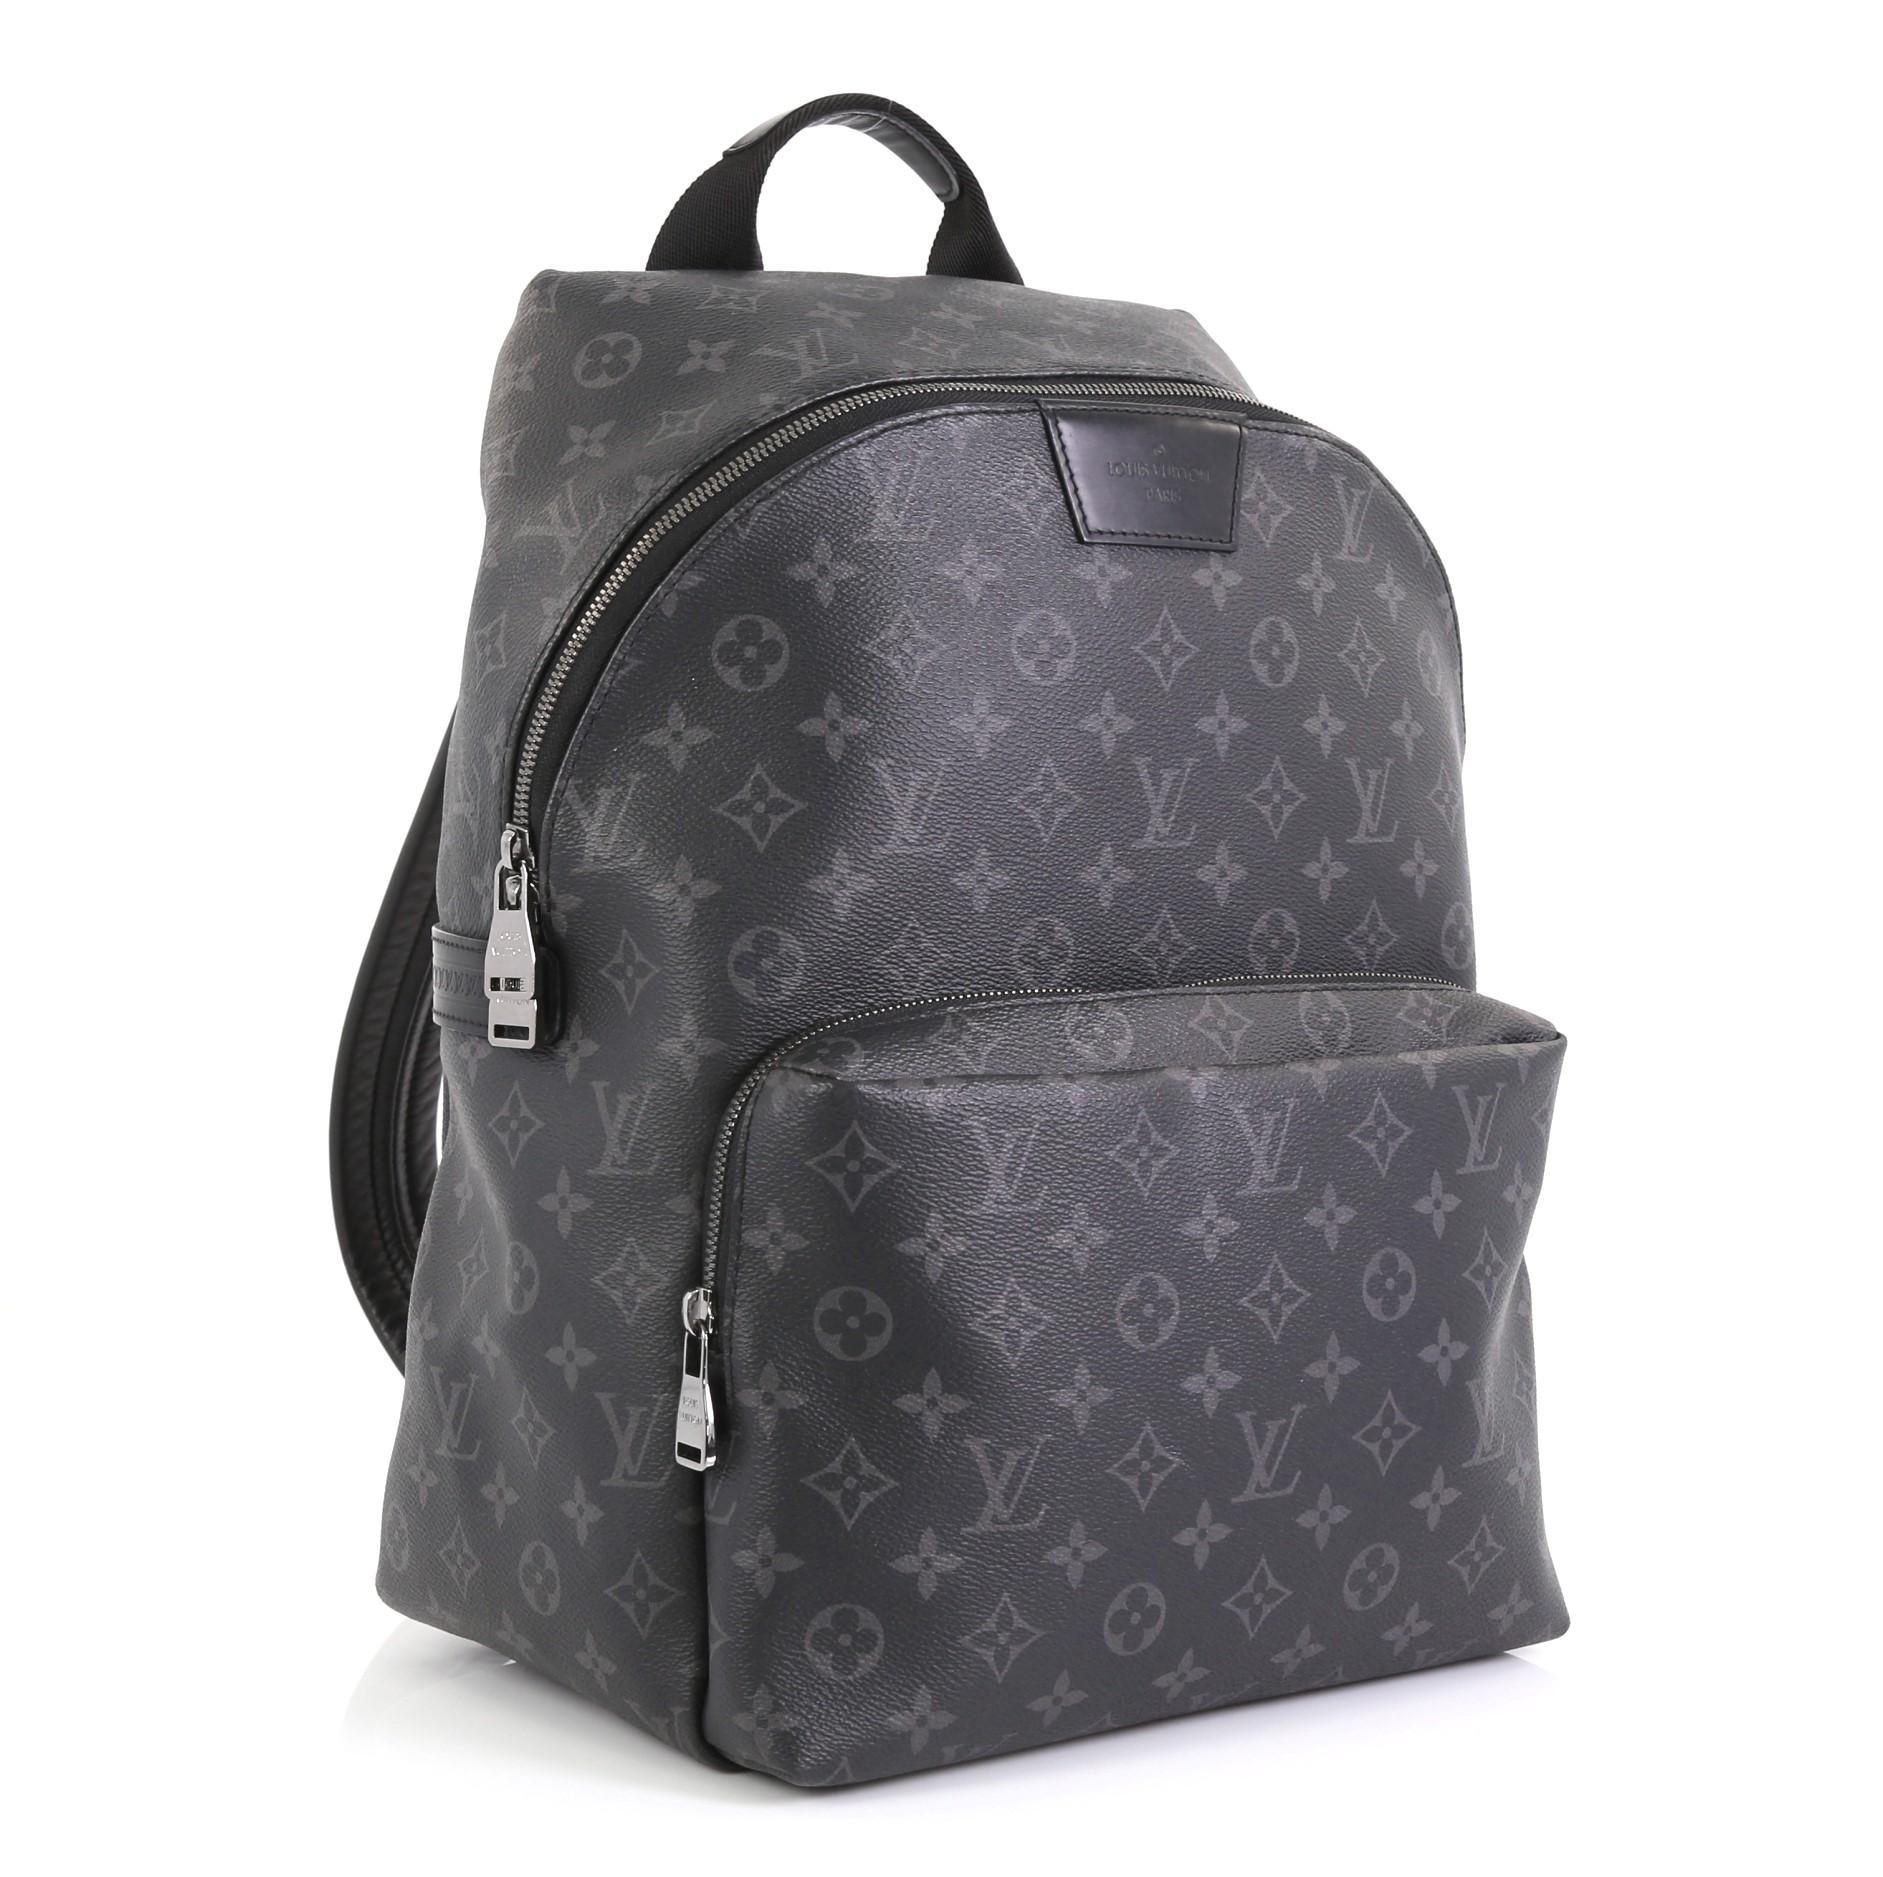 This Louis Vuitton Apollo Backpack Monogram Eclipse Canvas, crafted from monogram eclipse coated canvas, features a top handle, adjustable back straps, exterior front zip compartment, and gunmetal-tone hardware. Its two-way zip closure opens to a